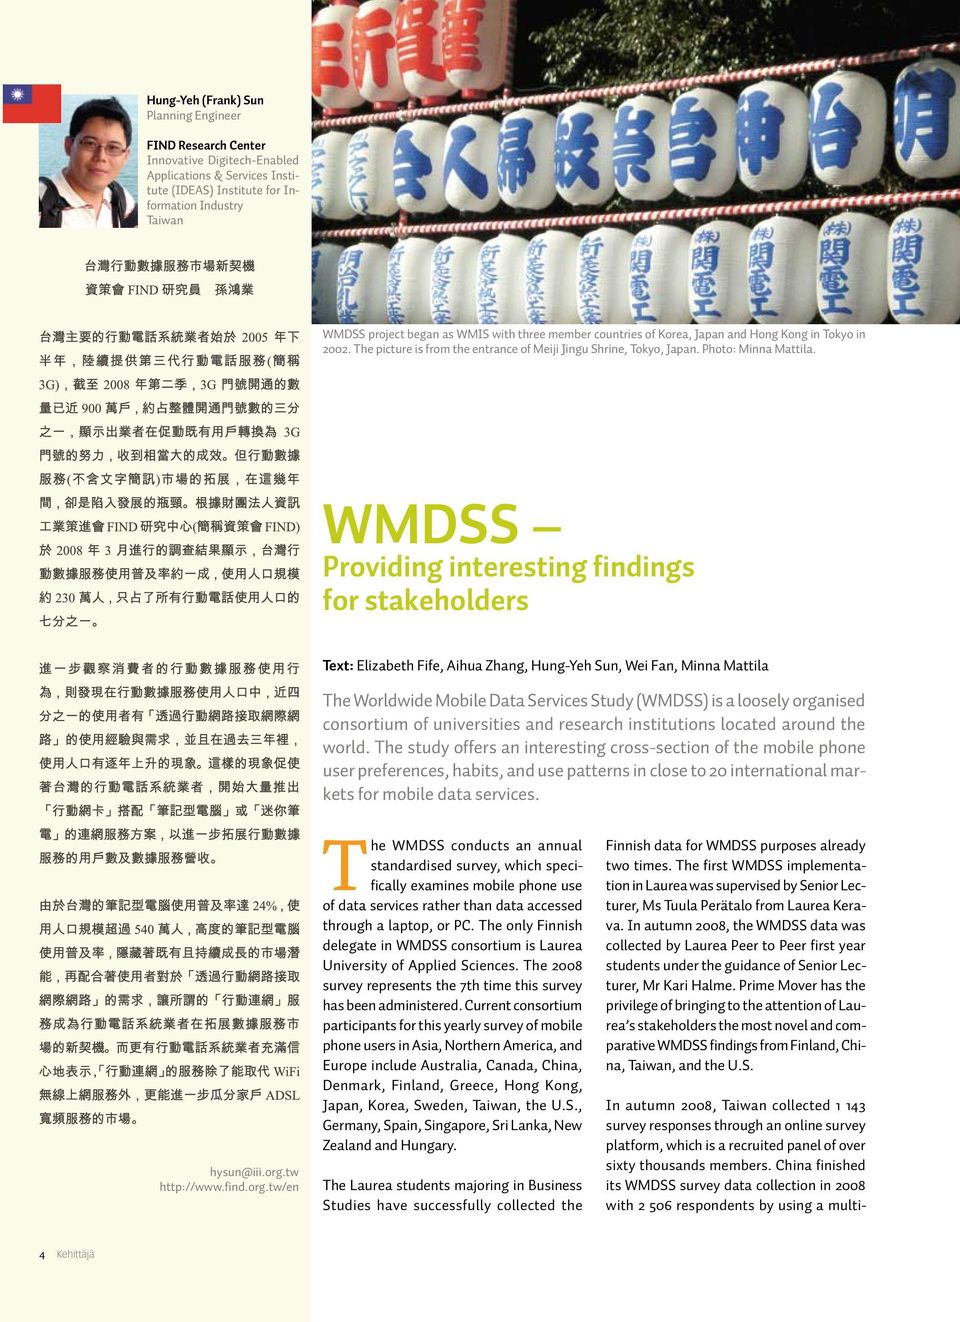 WMDSS Providing interesting findings for stakeholders Text: Elizabeth Fife, Aihua Zhang, Hung-Yeh Sun, Wei Fan, Minna Mattila The Worldwide Mobile Data Services Study (WMDSS) is a loosely organised